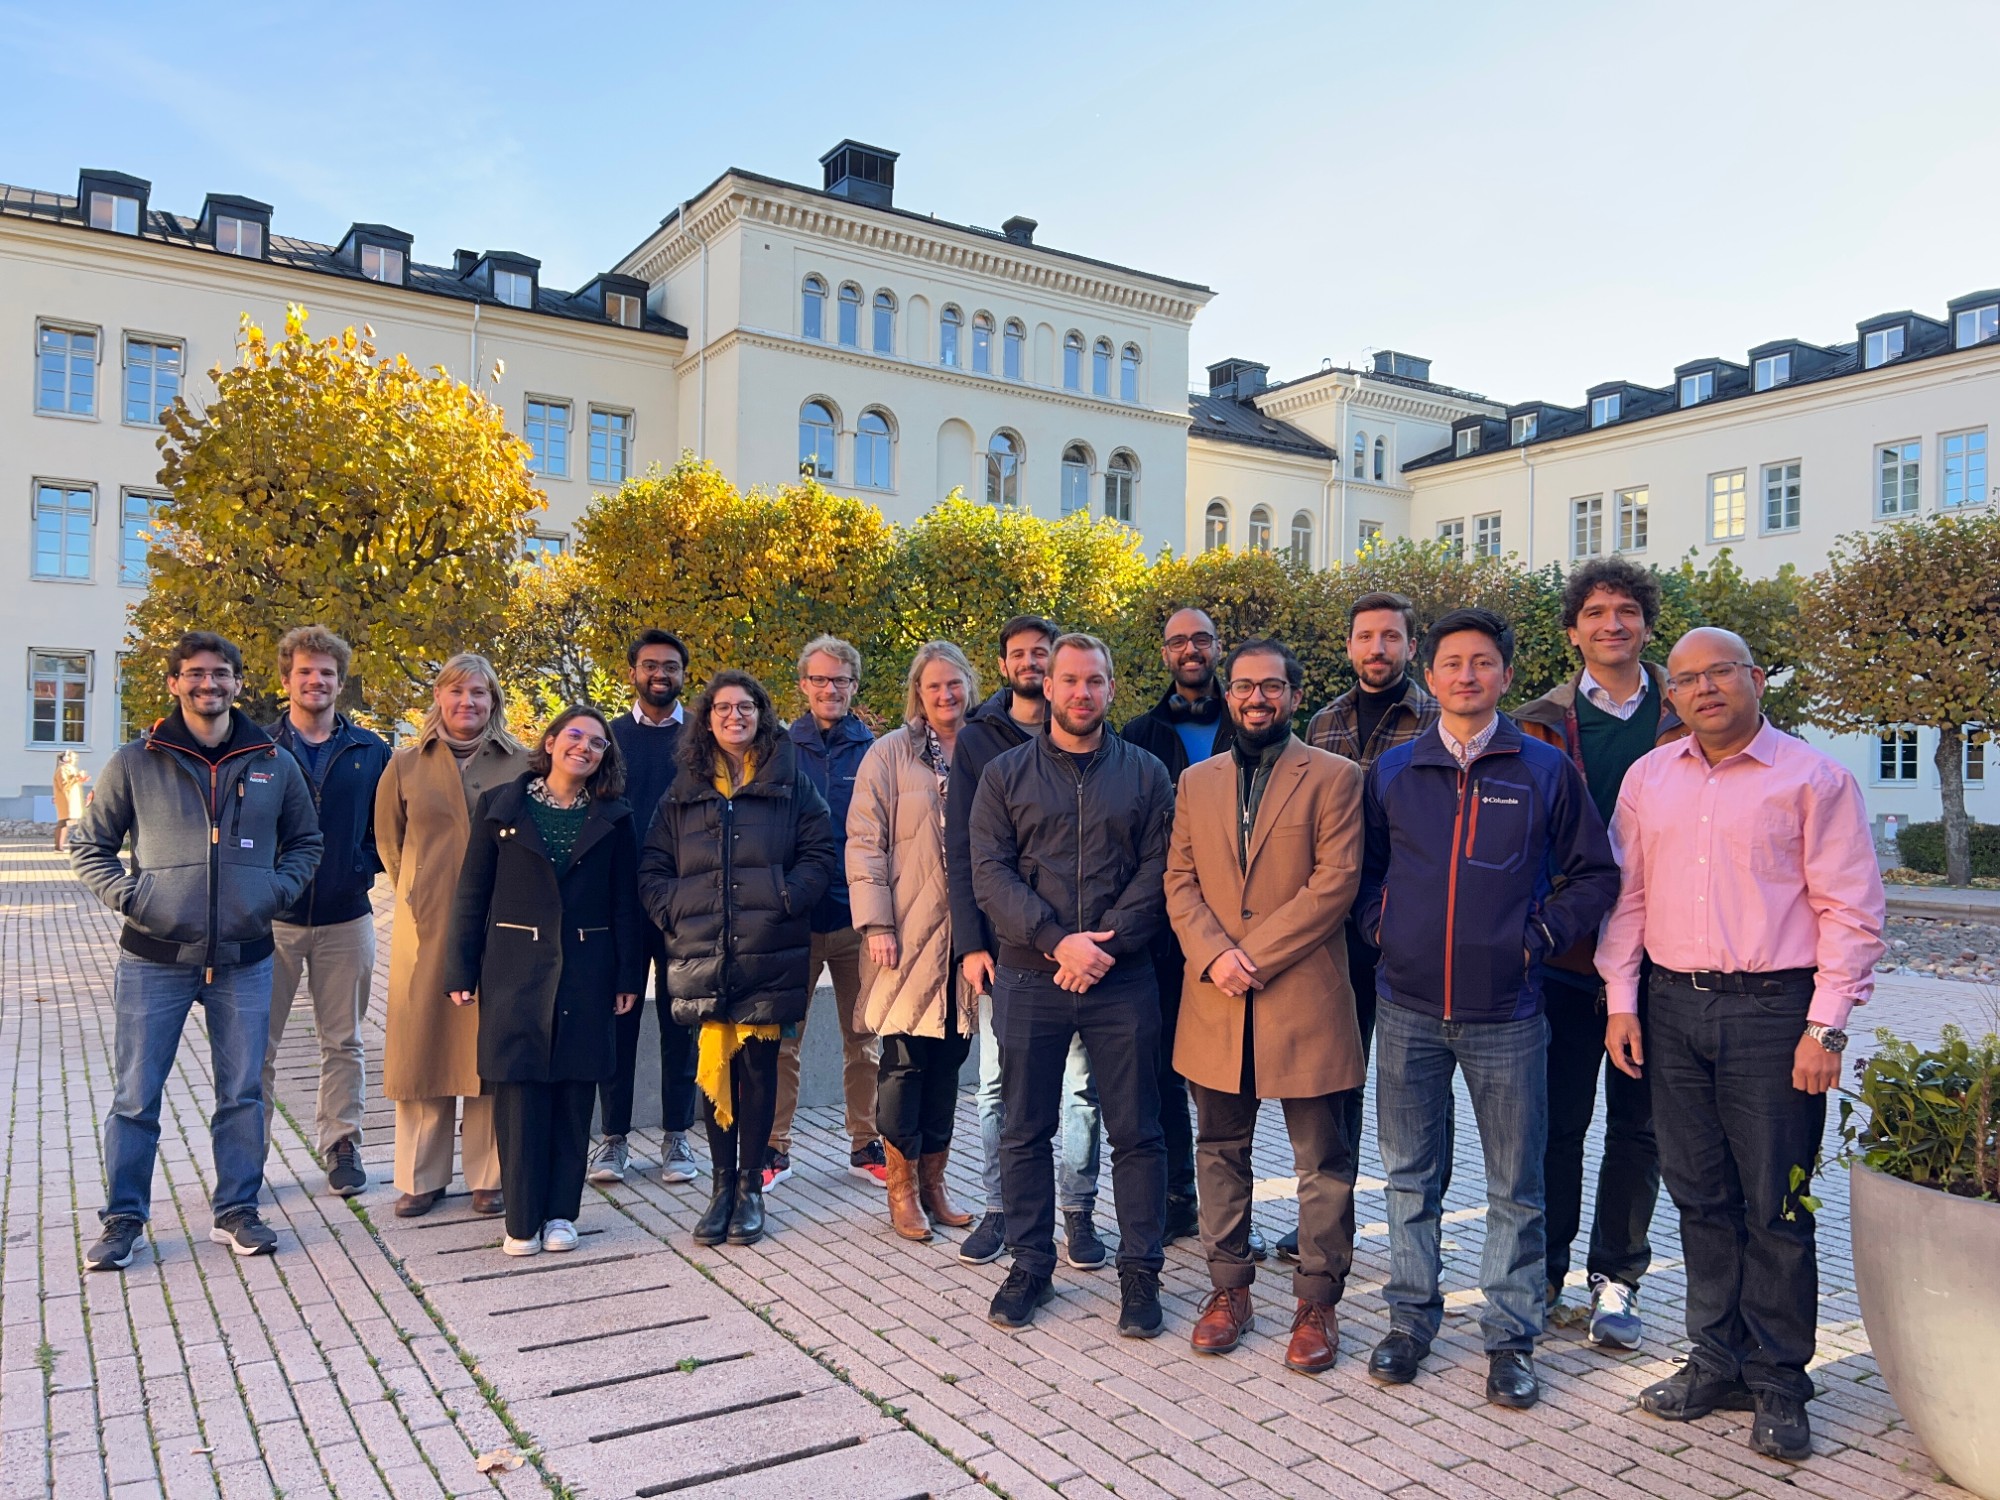 A research trip summary to the KTH Royal Institute of Technology in Stockholm, Sweden